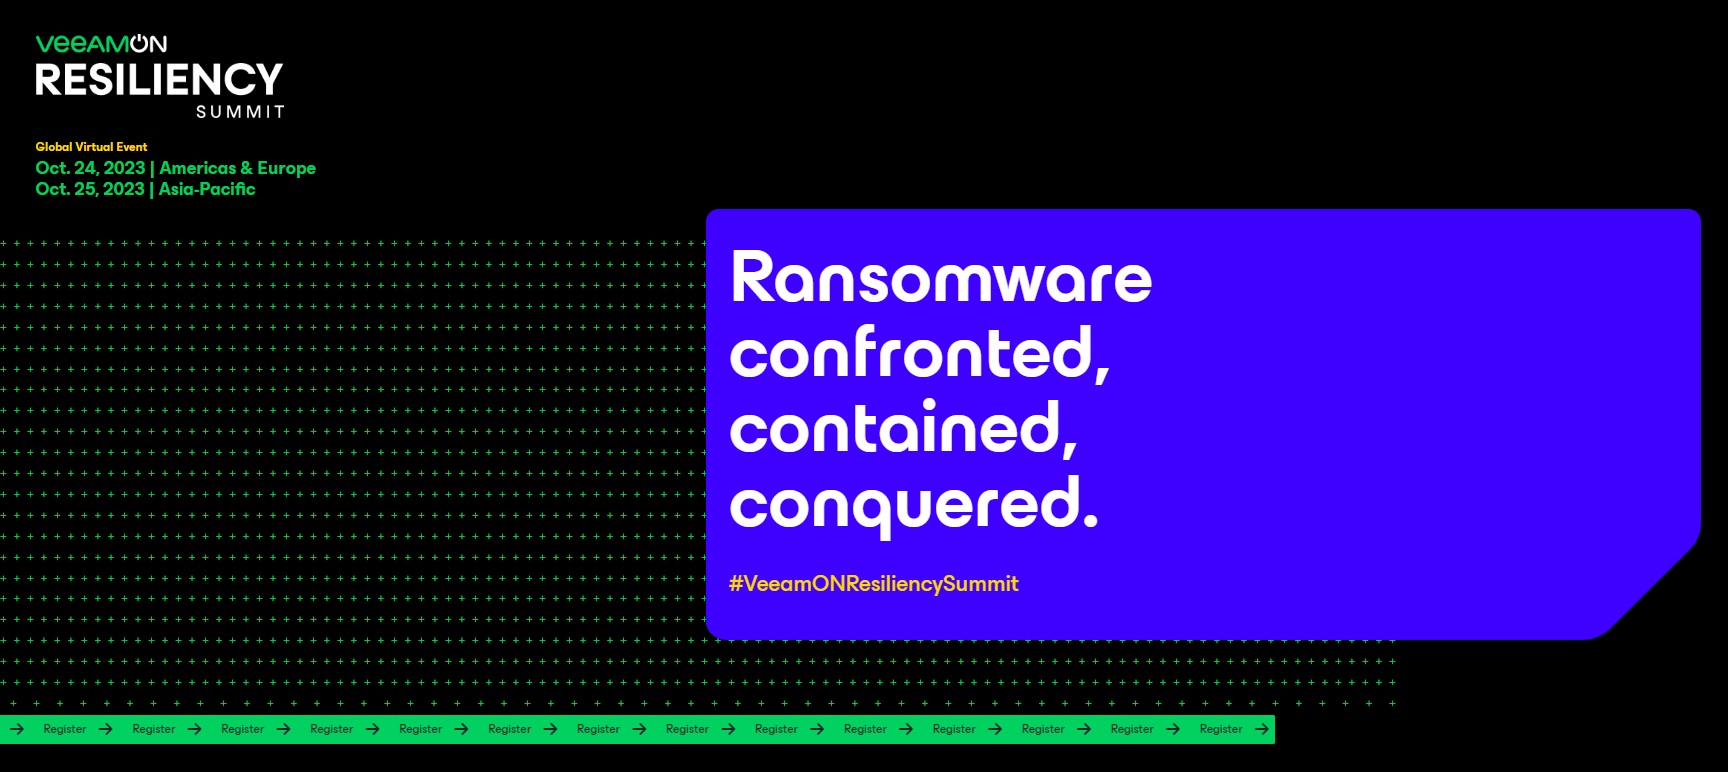 VeeamON Resiliency Summit Showcases How Organizations Can Confront, Contain and Conquer Ransomware